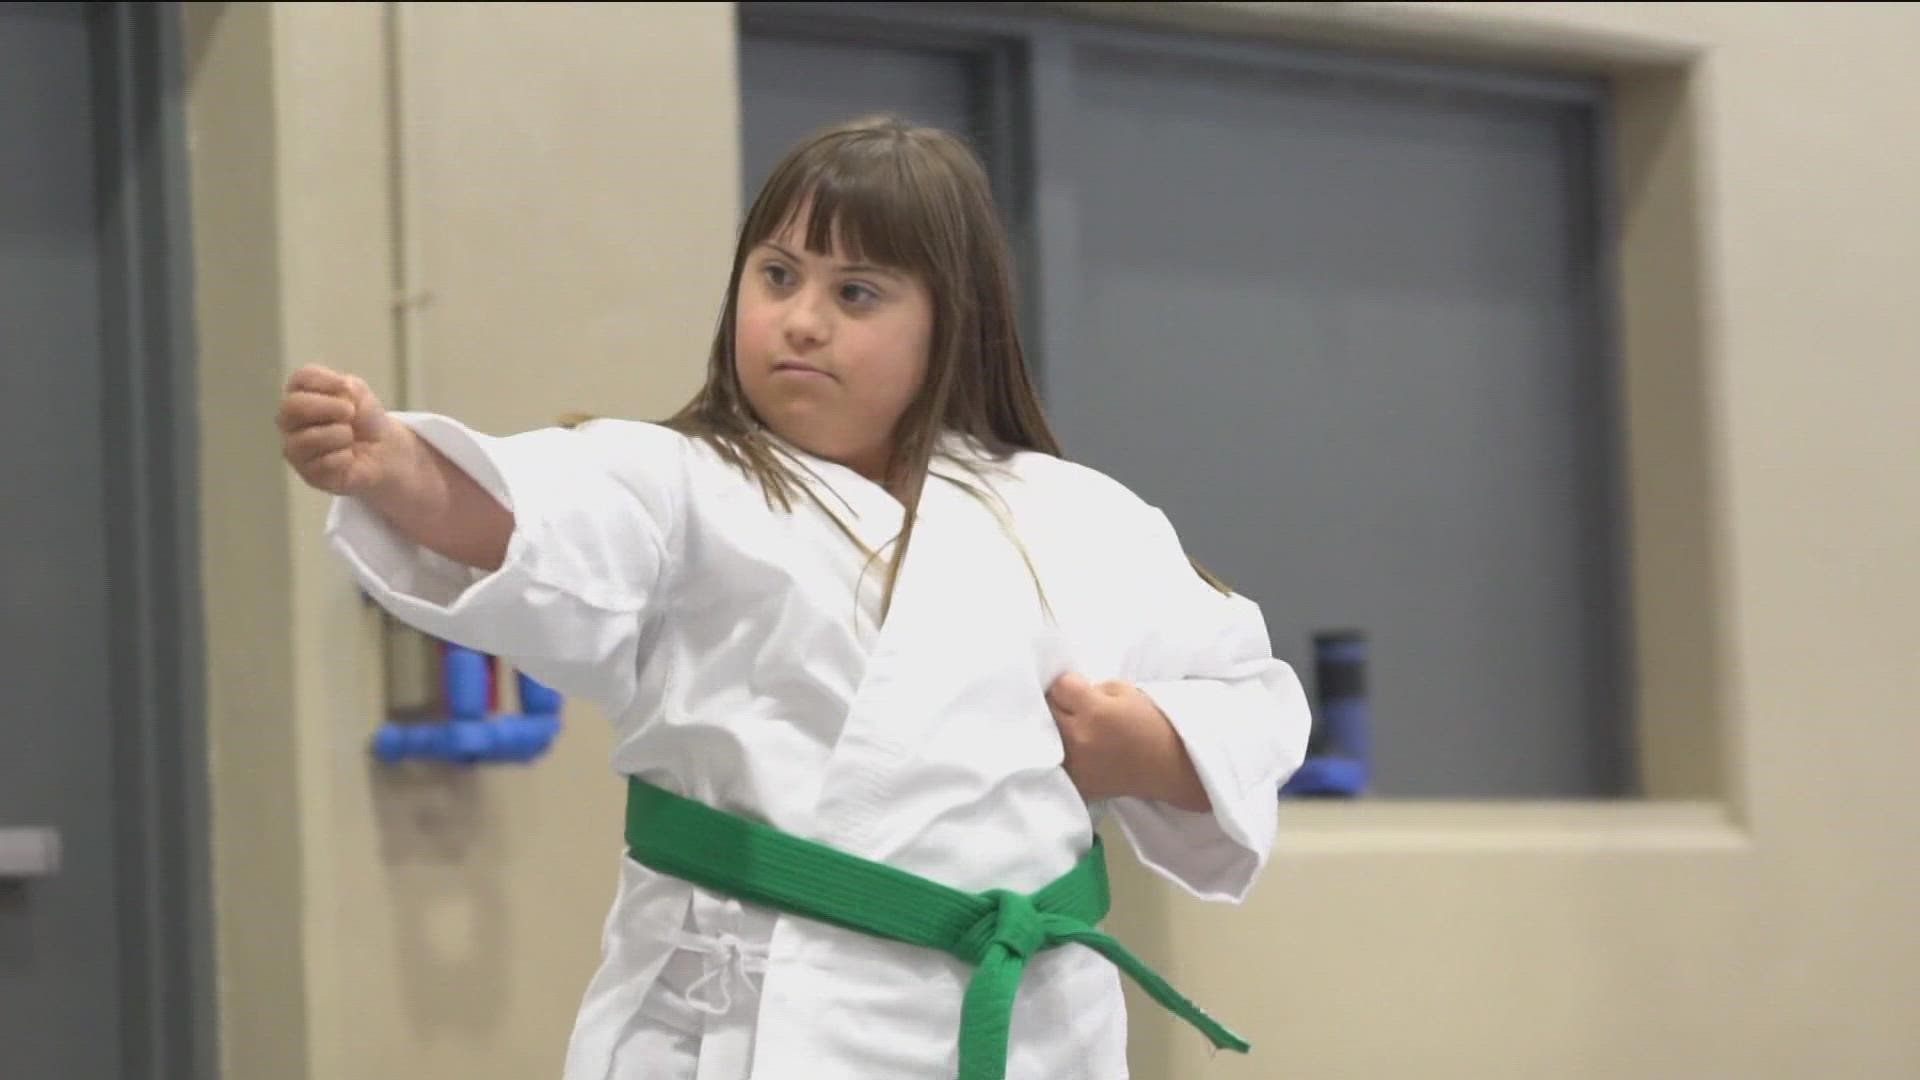 The program was started to help kids with special needs find a space where they could practice martial arts, regardless of their circumstances.